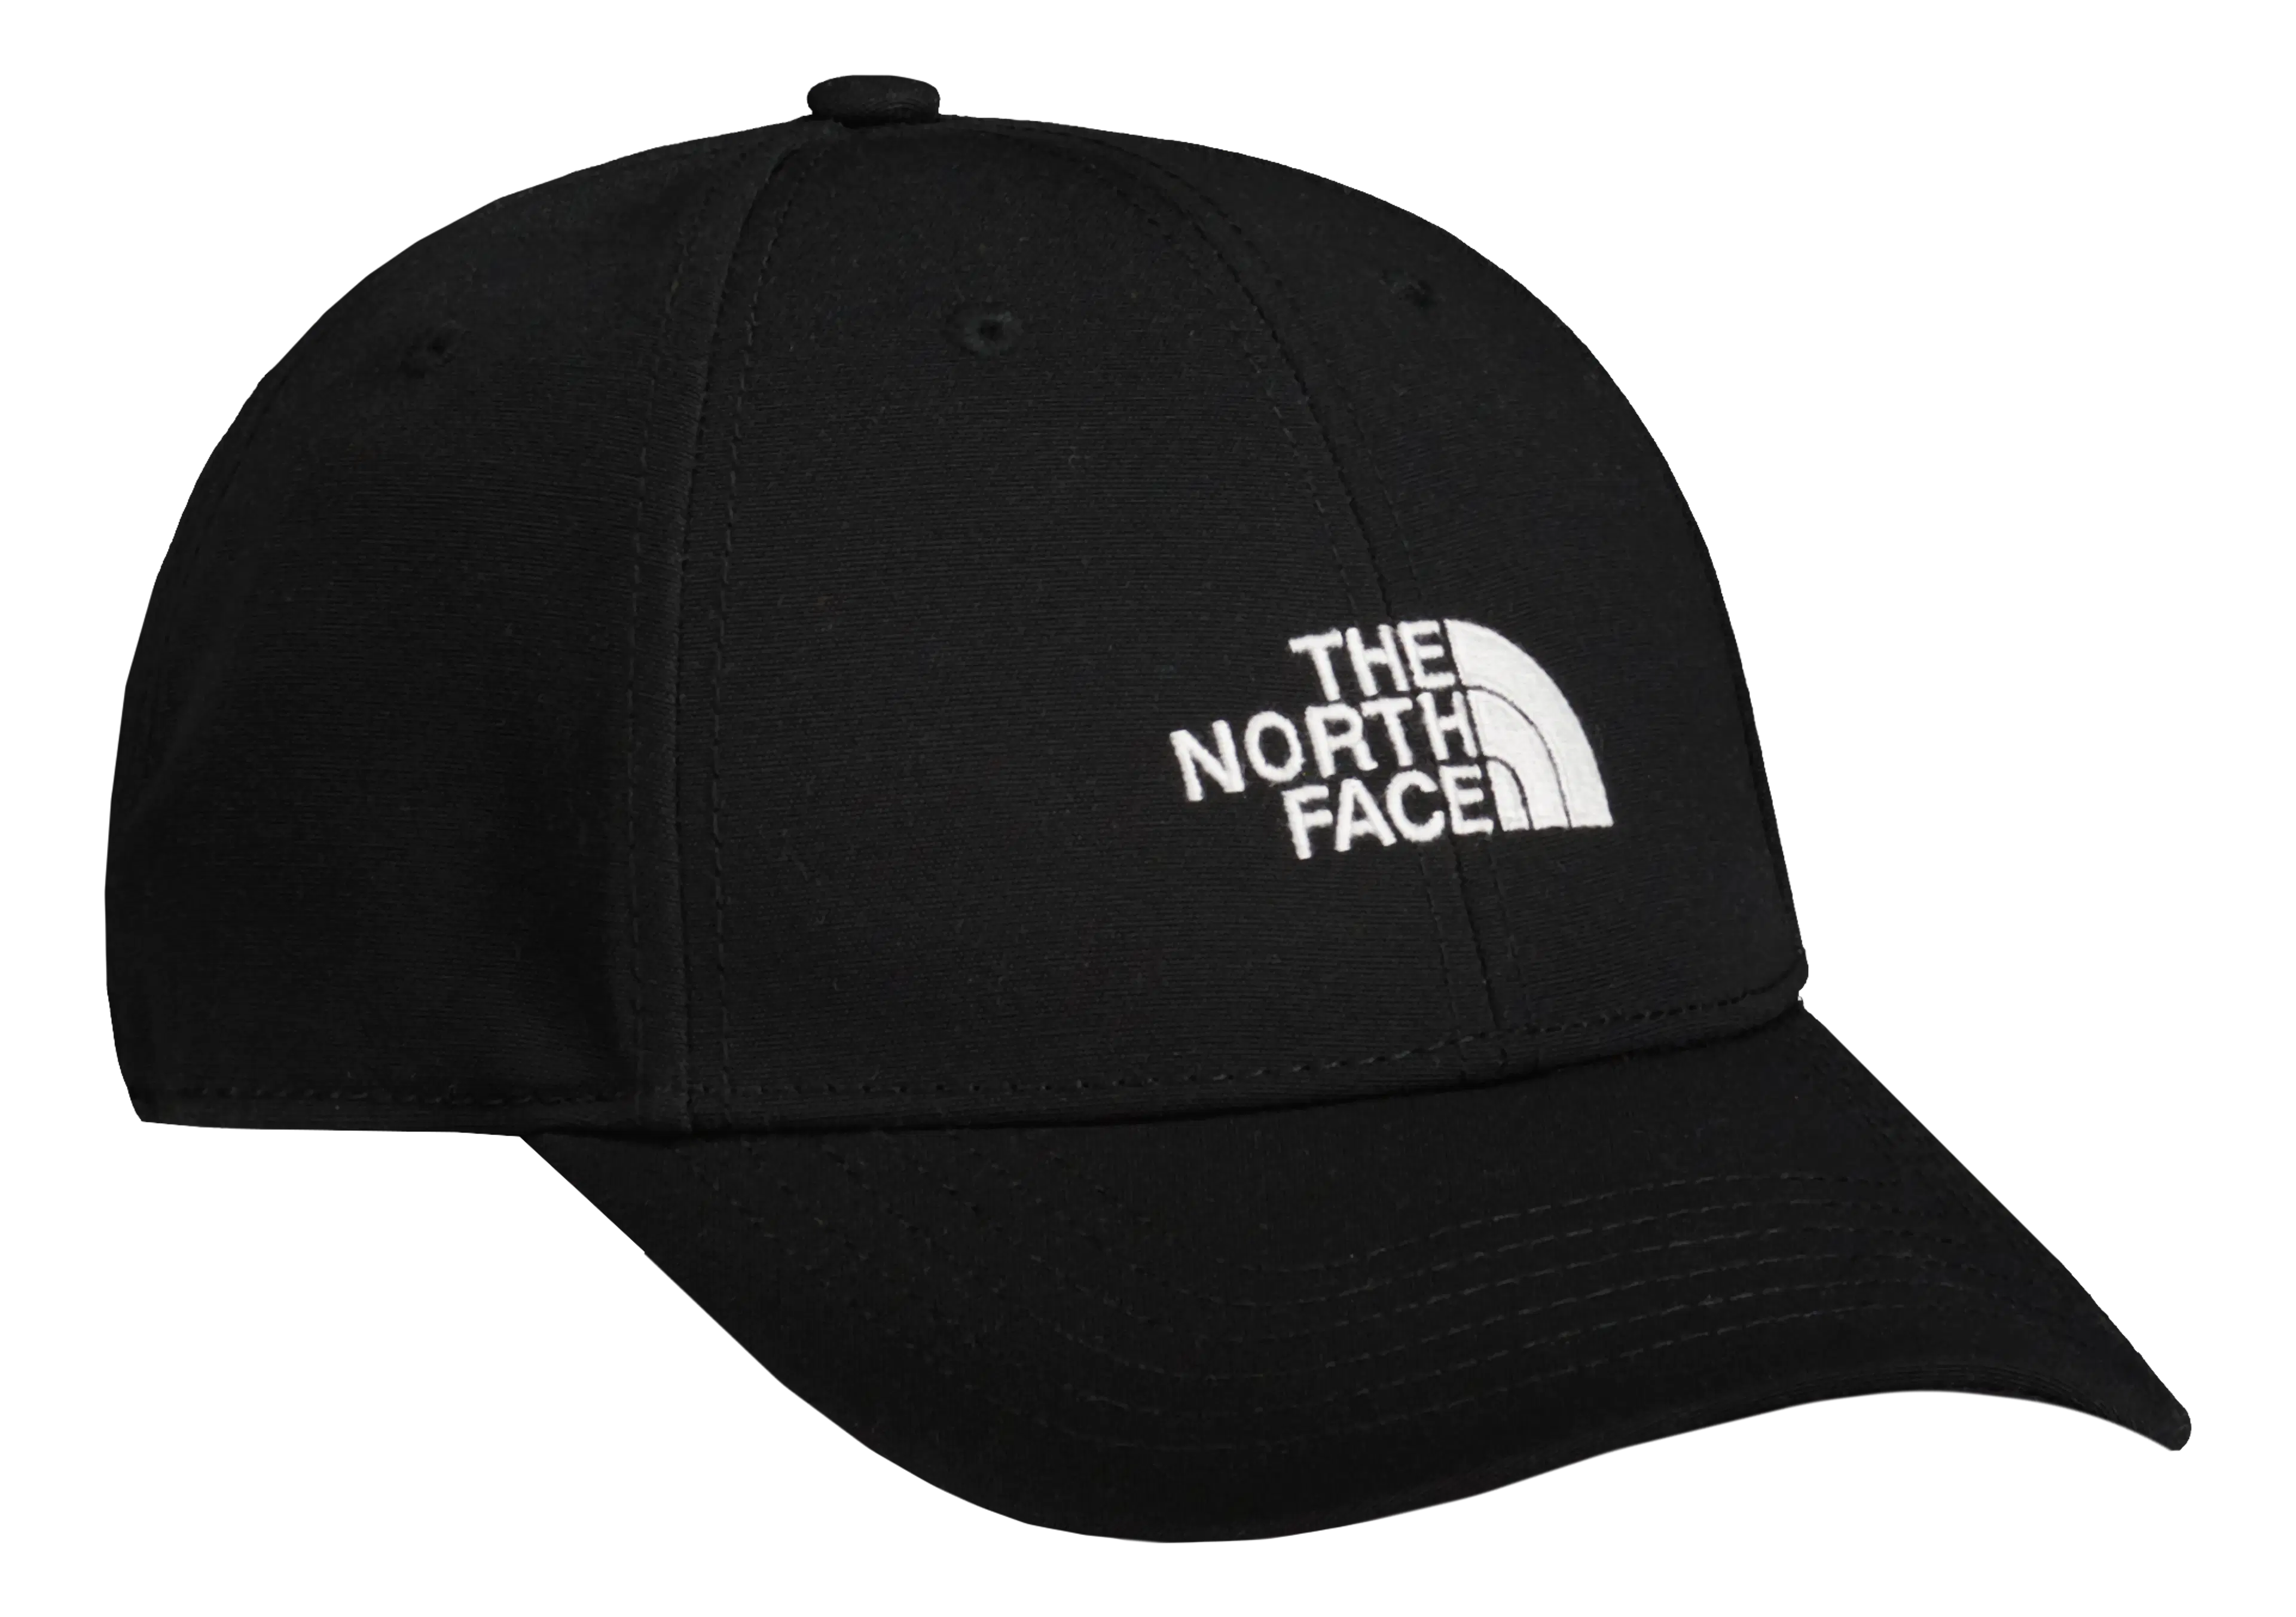 The North Face lippis